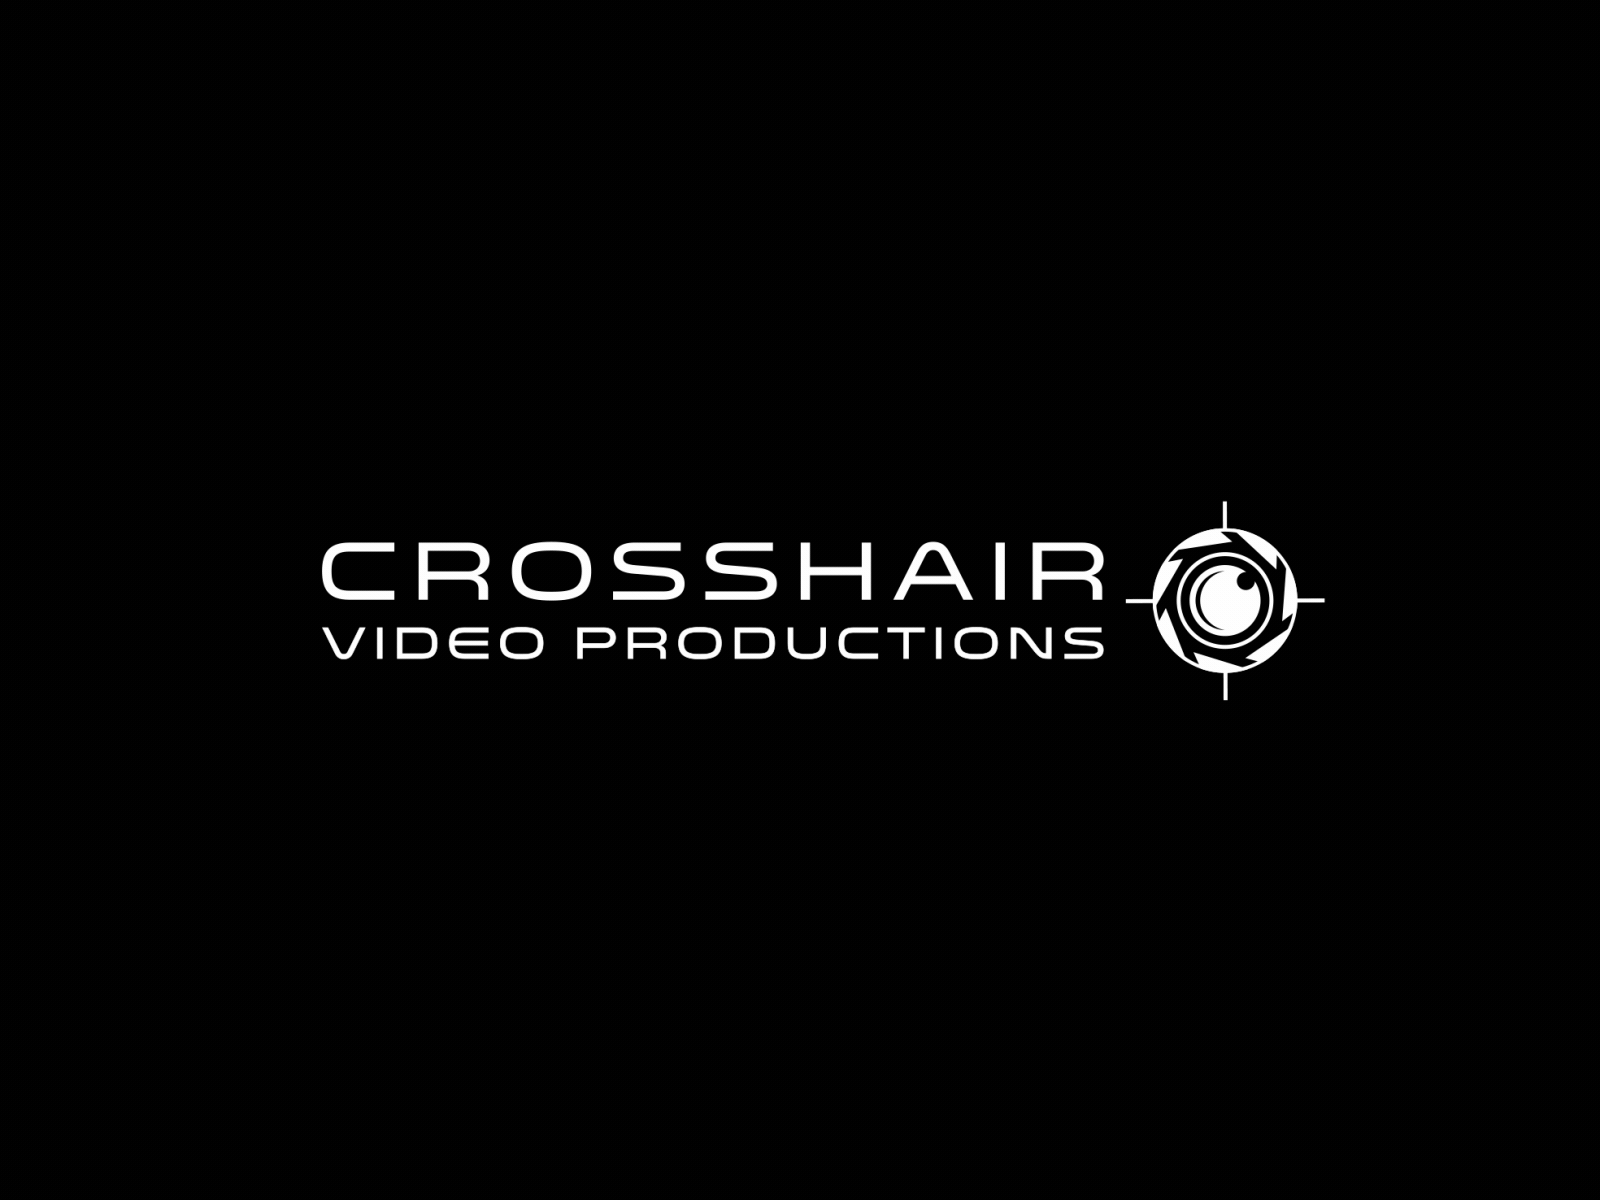 Crosshair Video Production Animation after effects animation animation 2d animation after effects animation design logo animated logo animation logo animations motion graphics